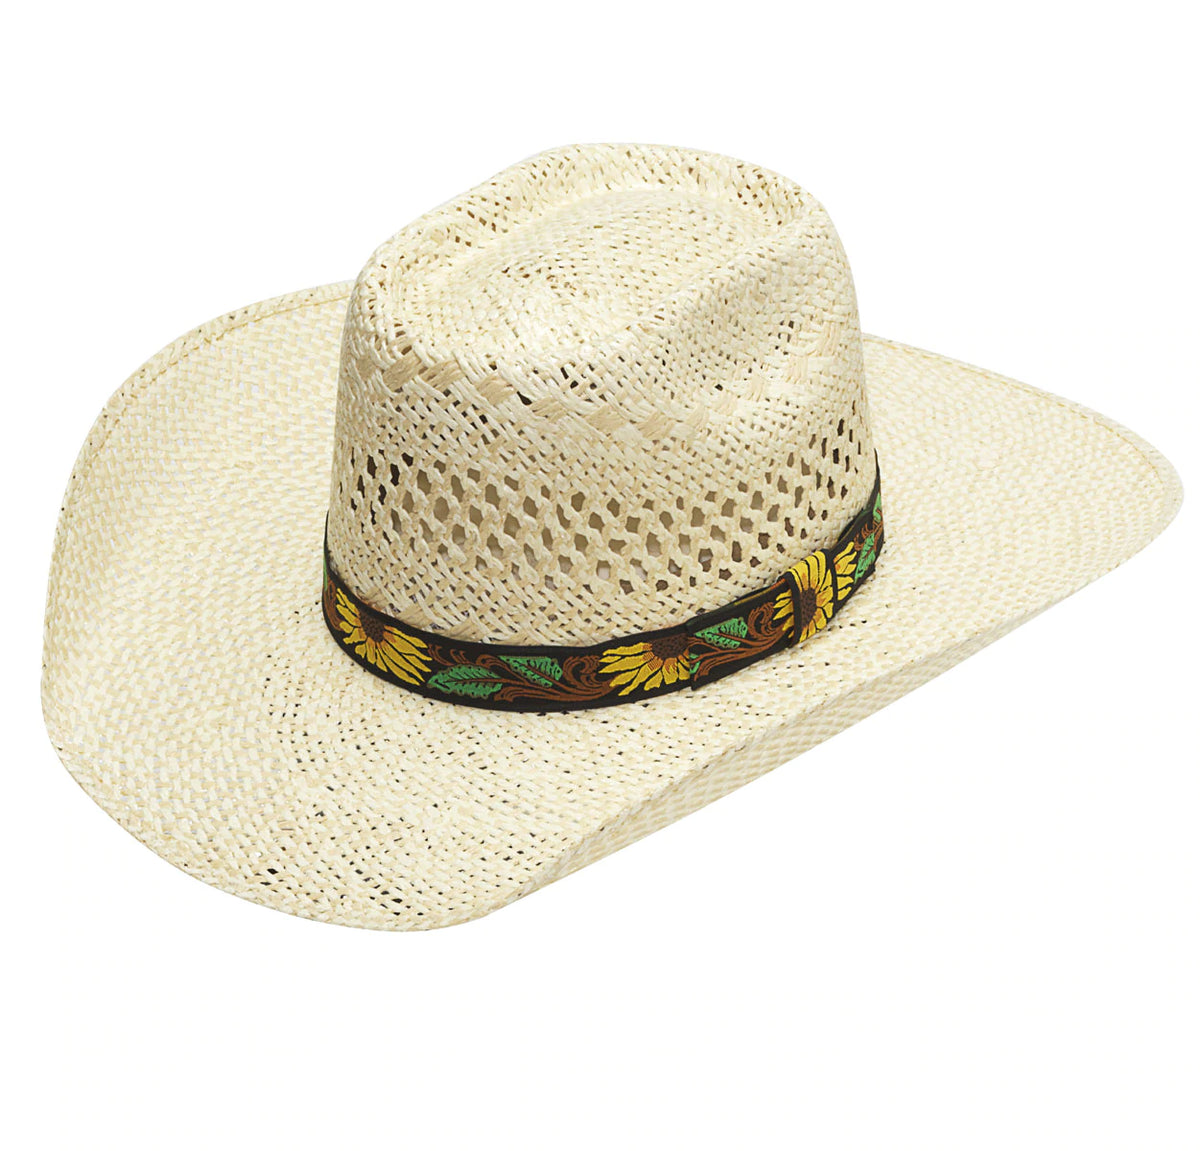 Twister Twisted Weave Vented Straw Hat with Sunflower Band